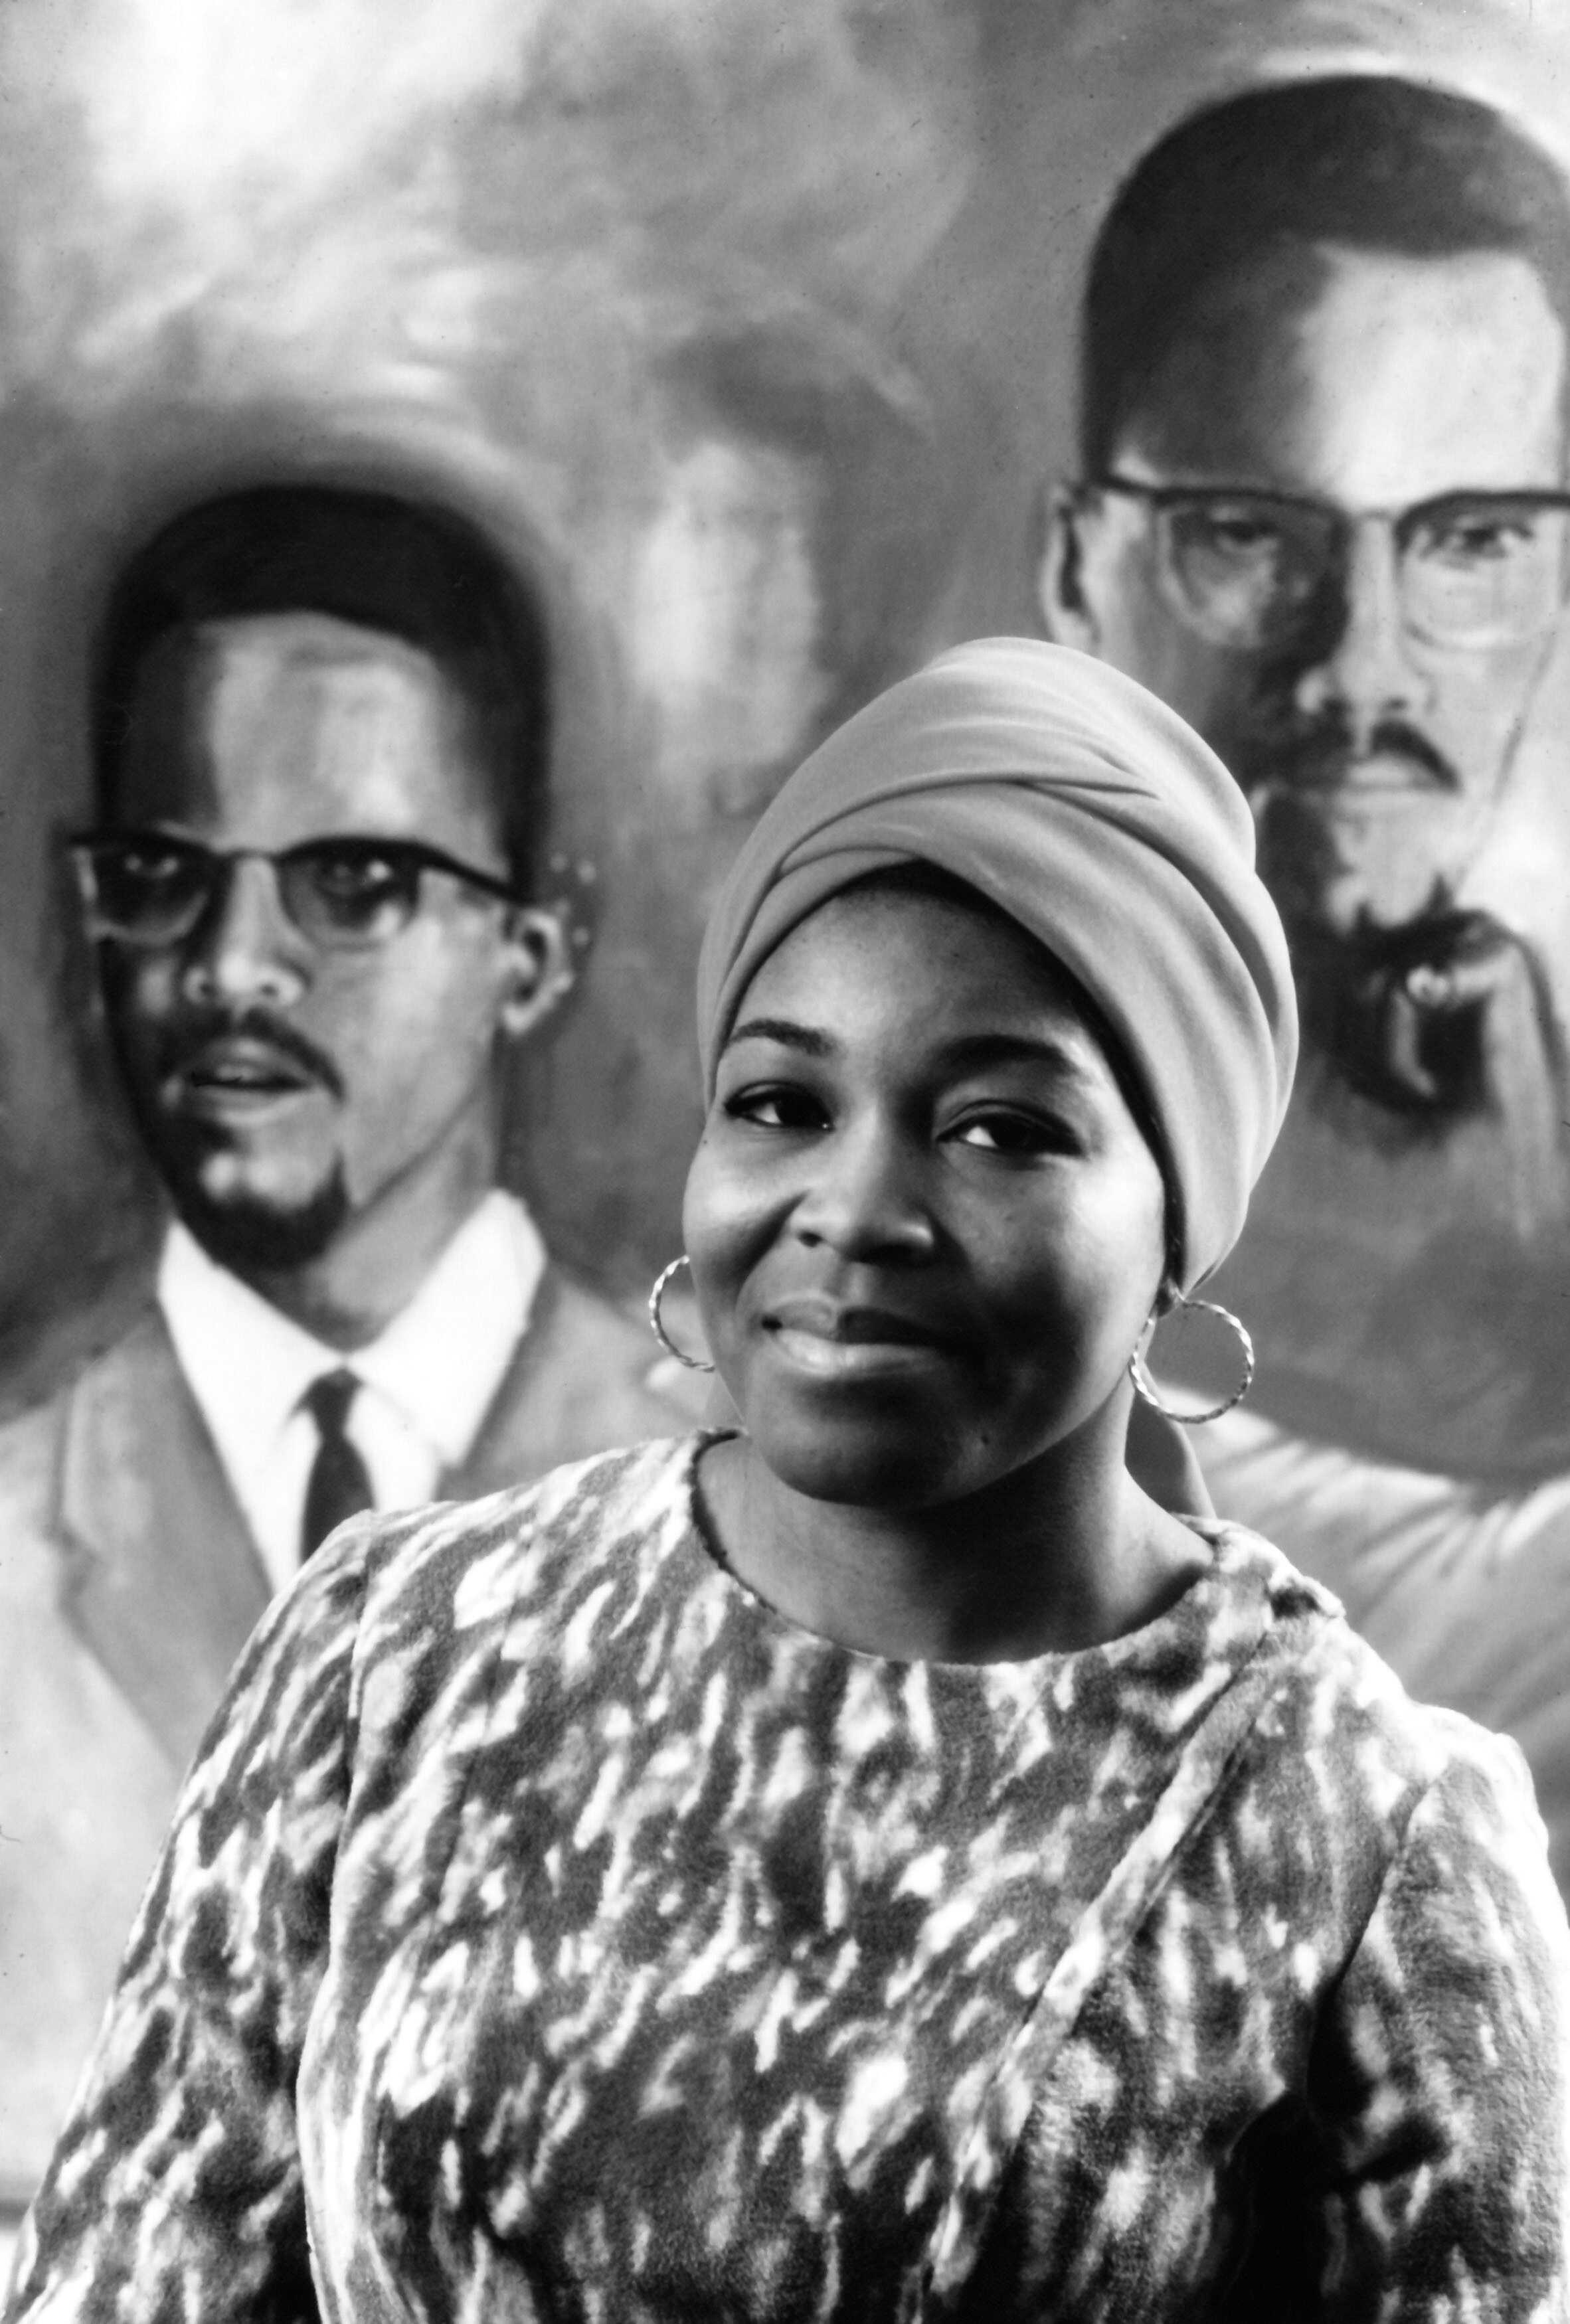 Black and white photograph of Betty Shabazz standing in front of a portrait of her late husband, Malcolm X